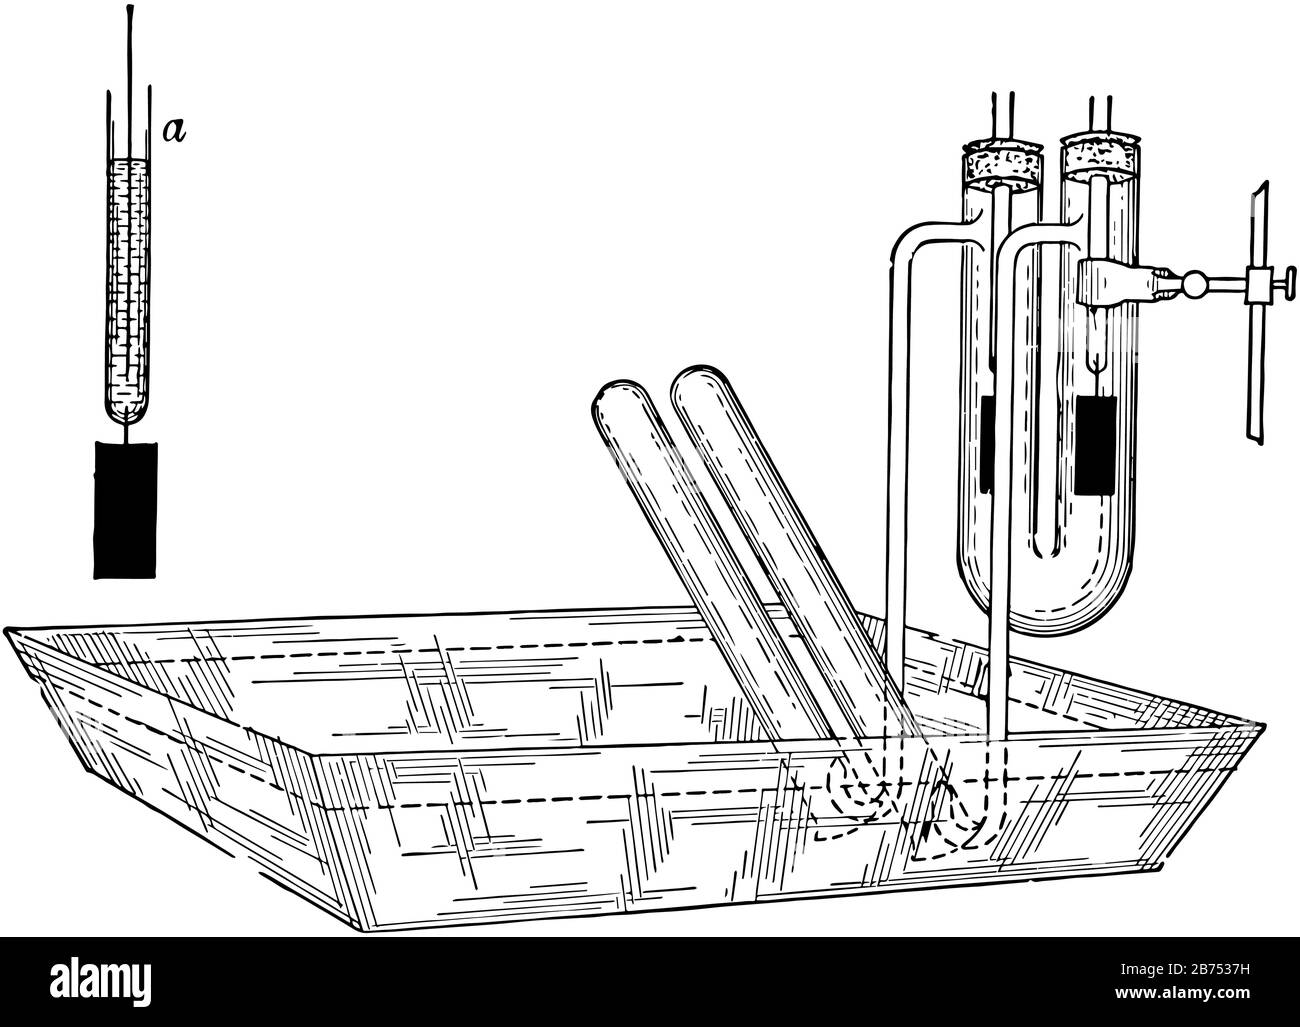 Electrolysis process is shown here, vintage line drawing or engraving illustration. Stock Vector